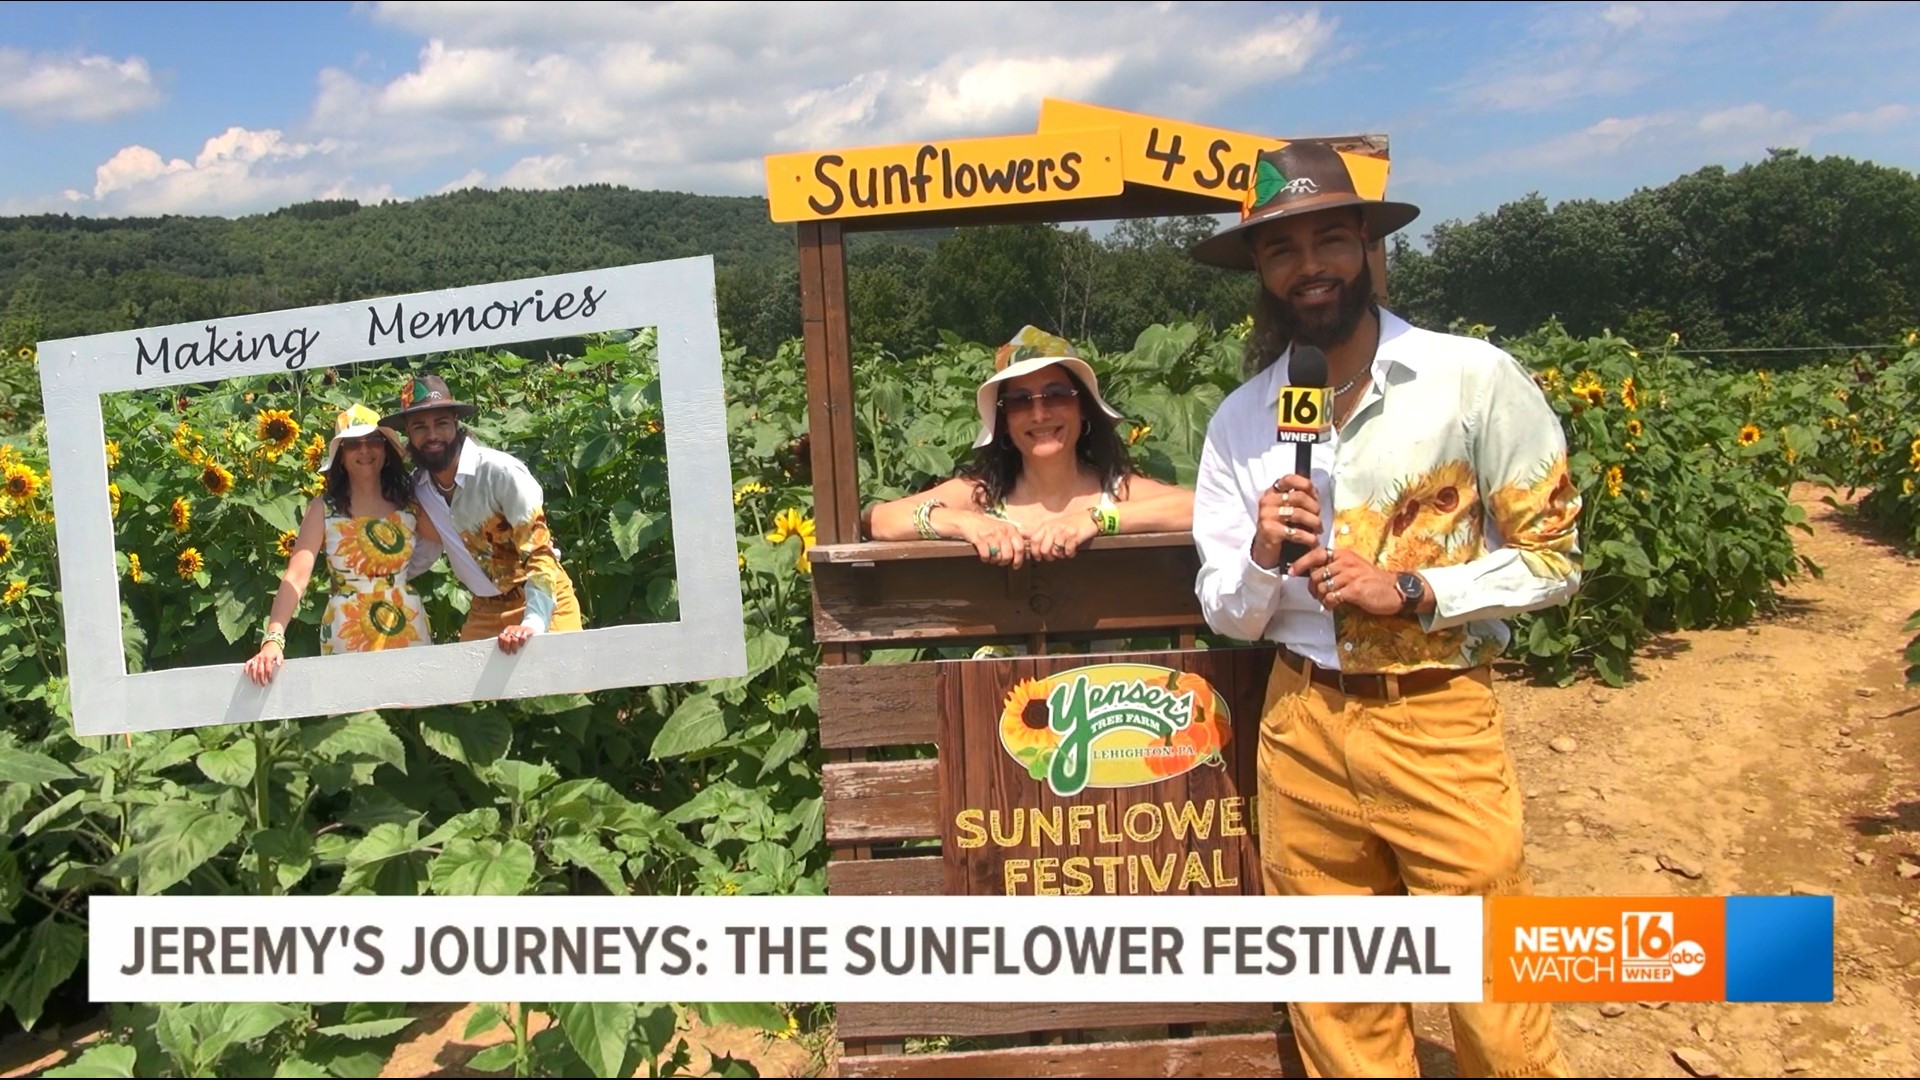 Join Newswatch 16's Jeremy Lewan and his mom as they enjoy the many interesting varieties of sunflowers on display at the Sunflower Festival at Yenser's Tree Farm.